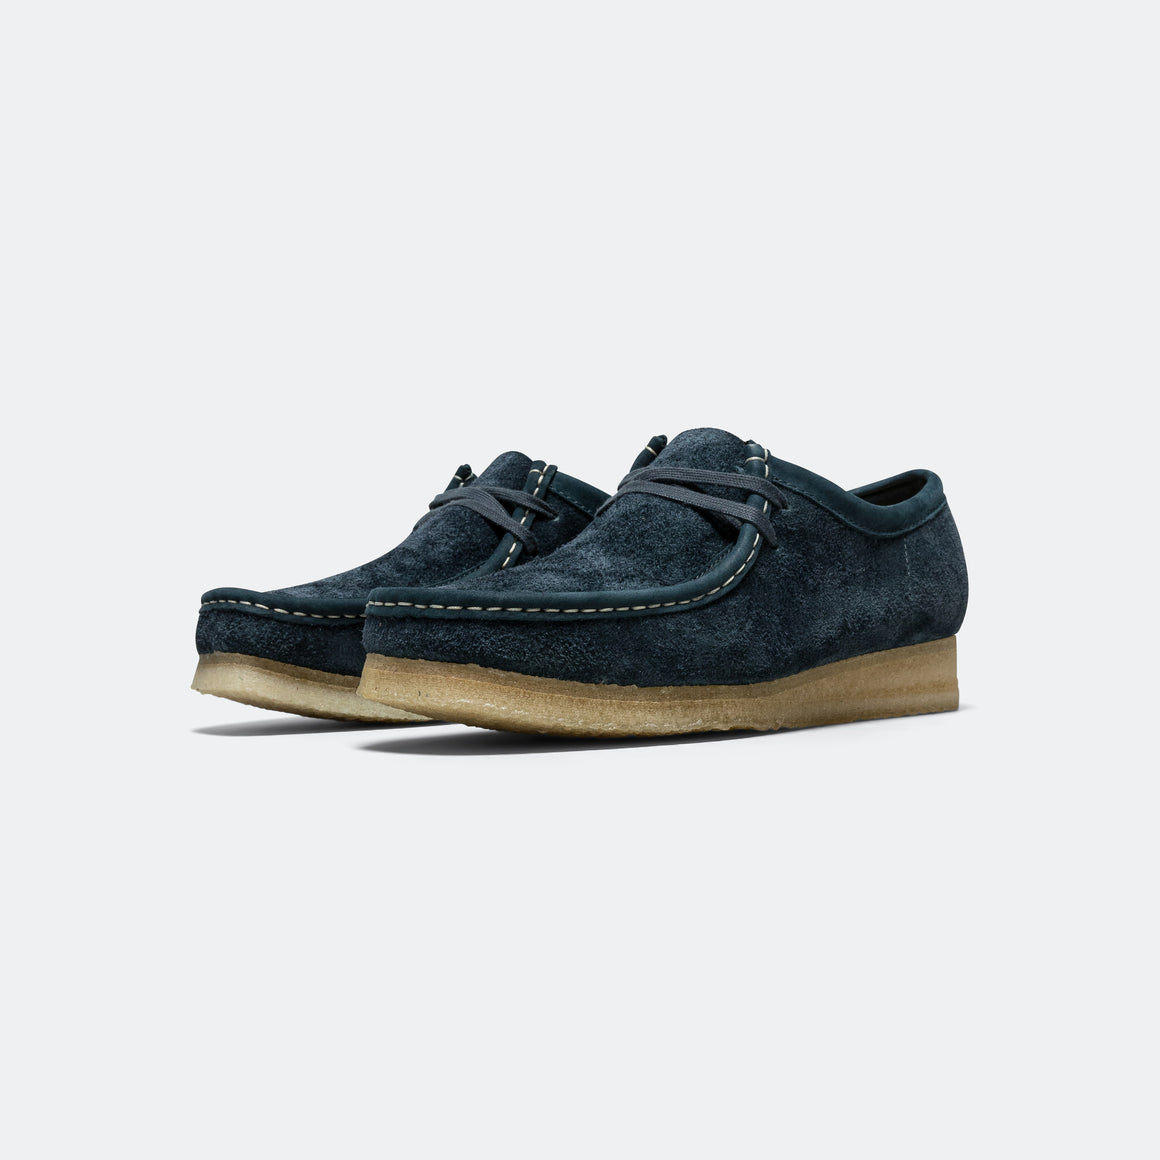 Clarks - Wallabee - Navy/Teal Suede - UP THERE